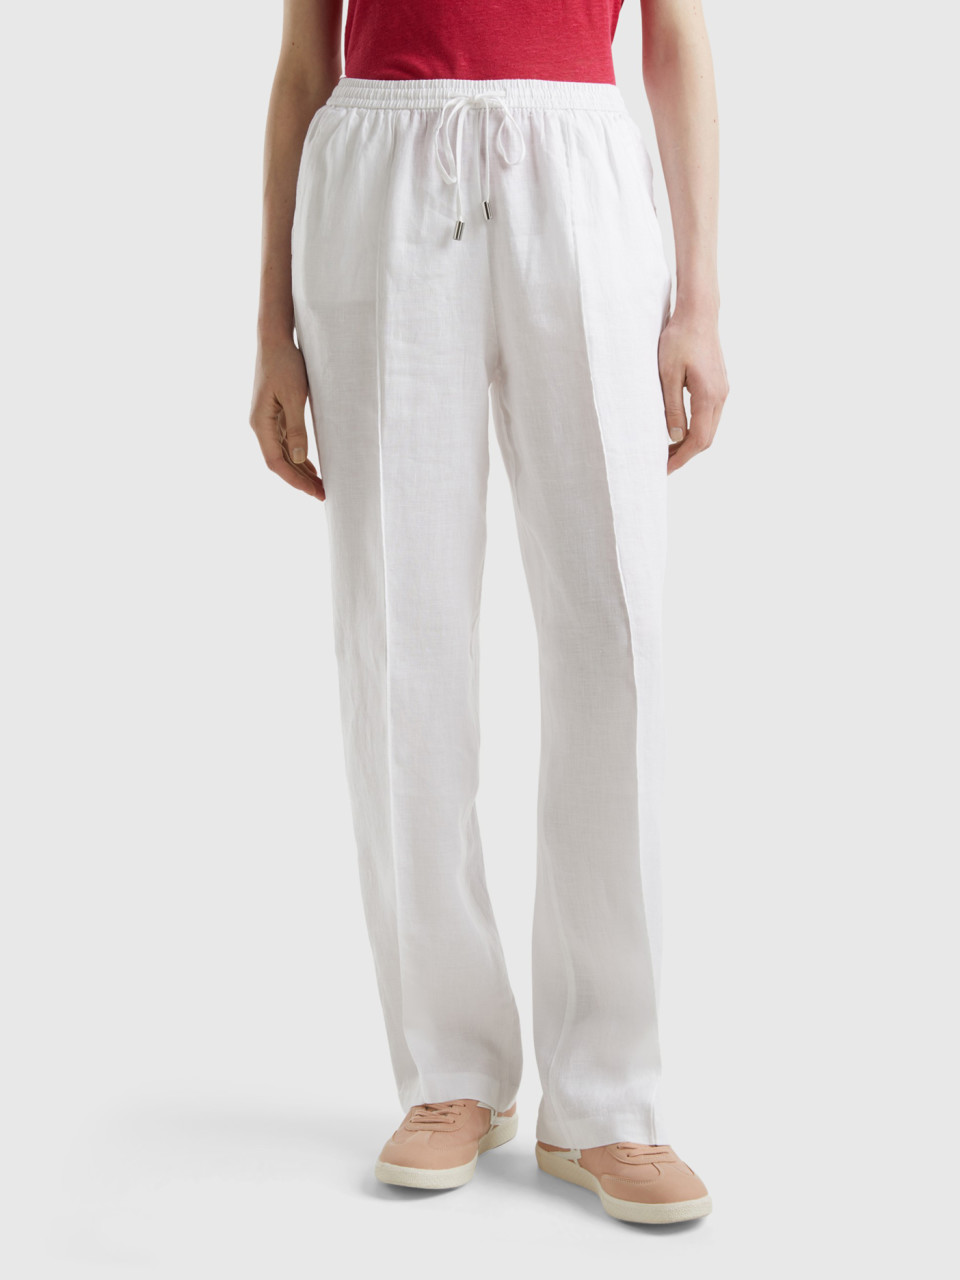 Benetton, Trousers In Pure Linen With Elastic, White, Women